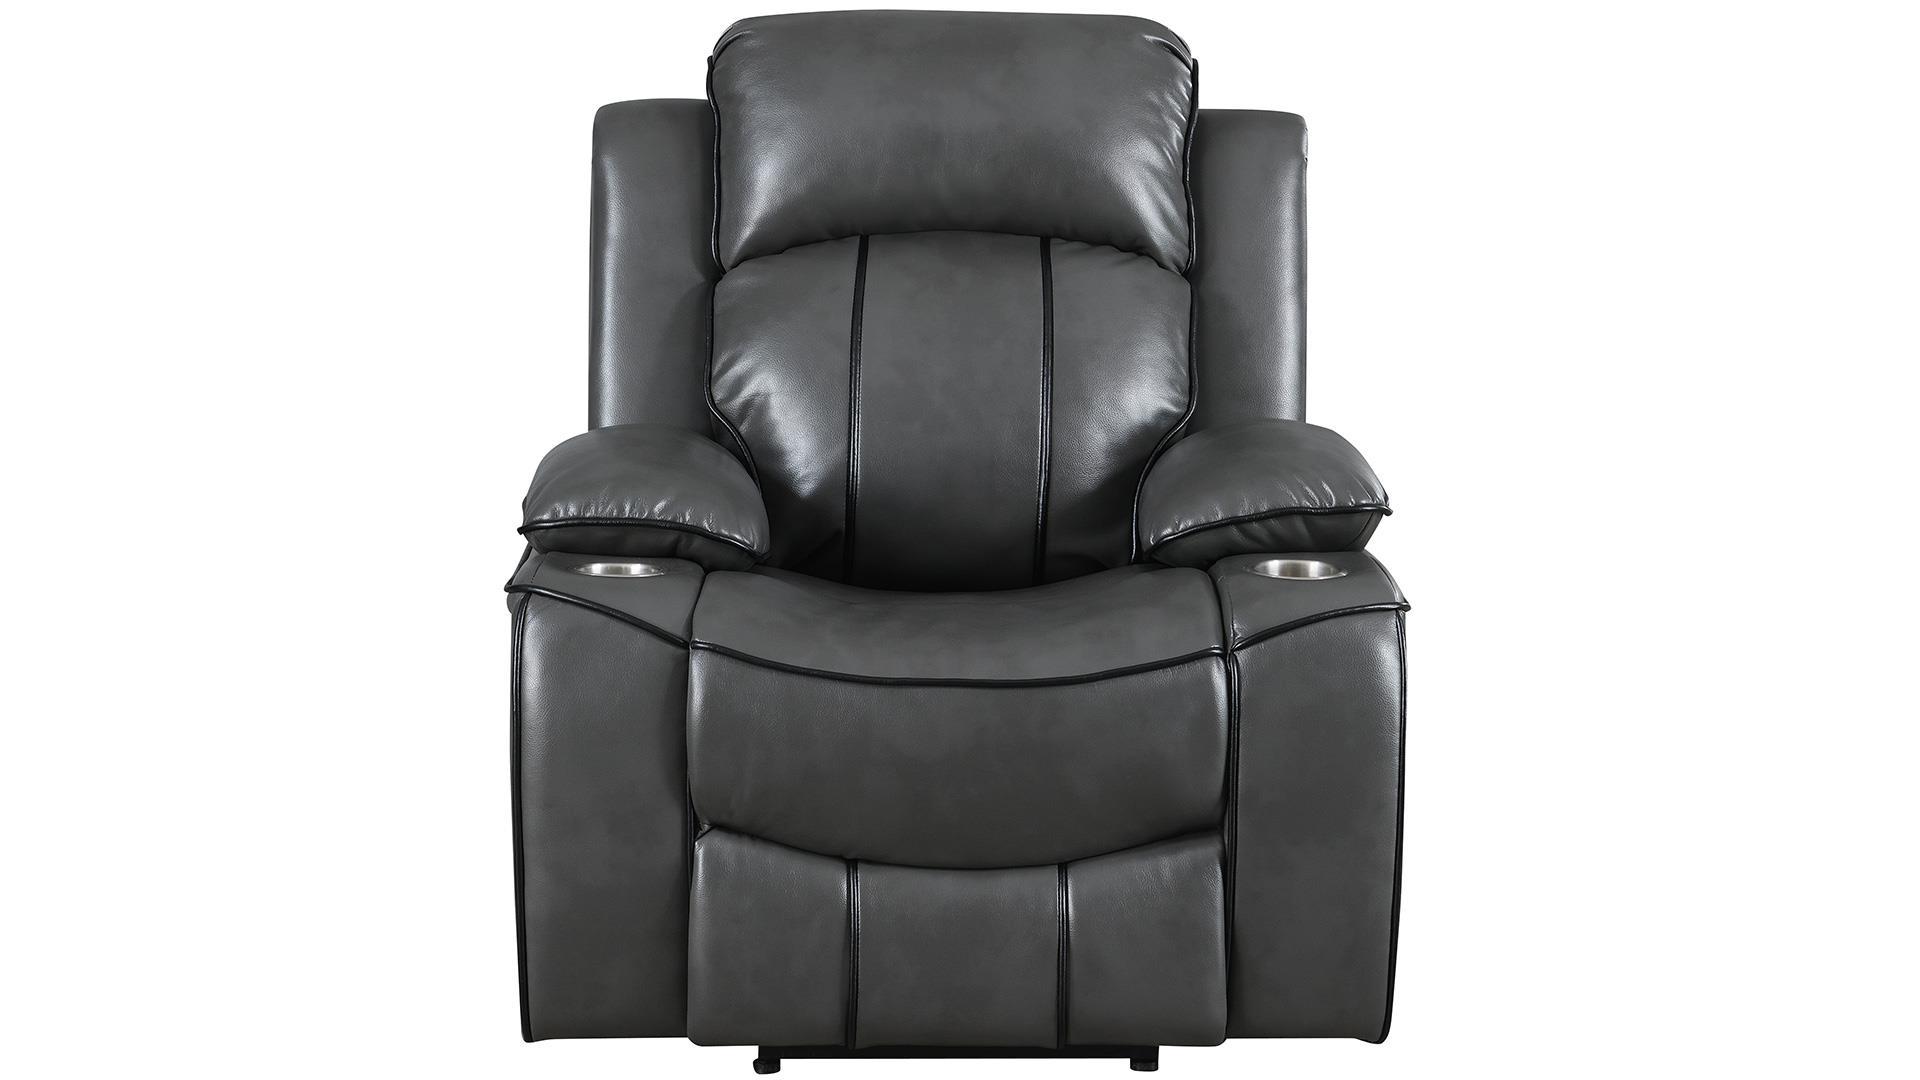 Transitional Power recliner U3120 CHARCOAL GREY U3120-DTP672-7 GREY W/DTP672-14 BLK WELTS-PR in Gray Faux Leather